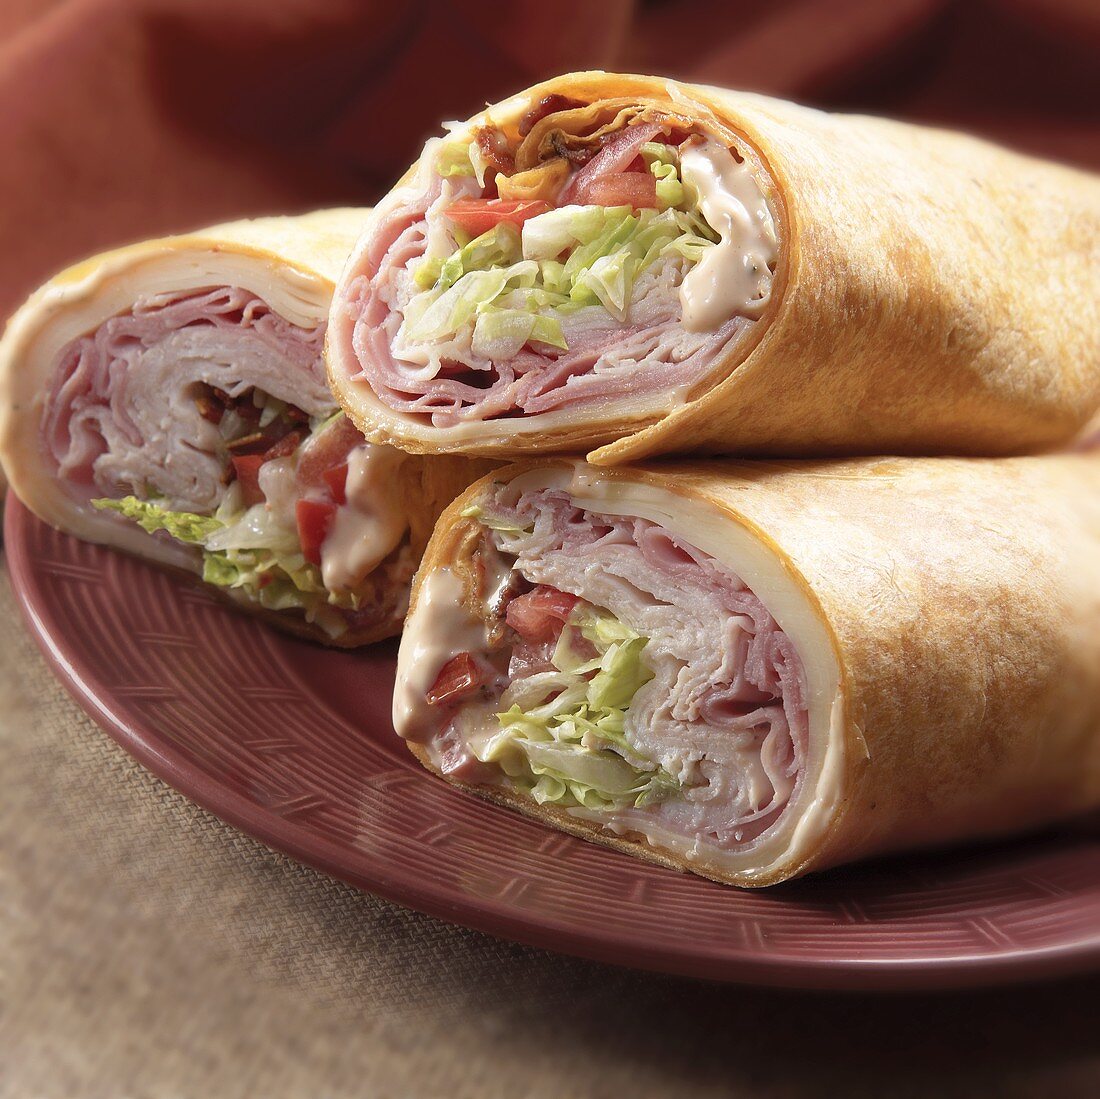 Three Ham and Turkey Wraps on a Plate